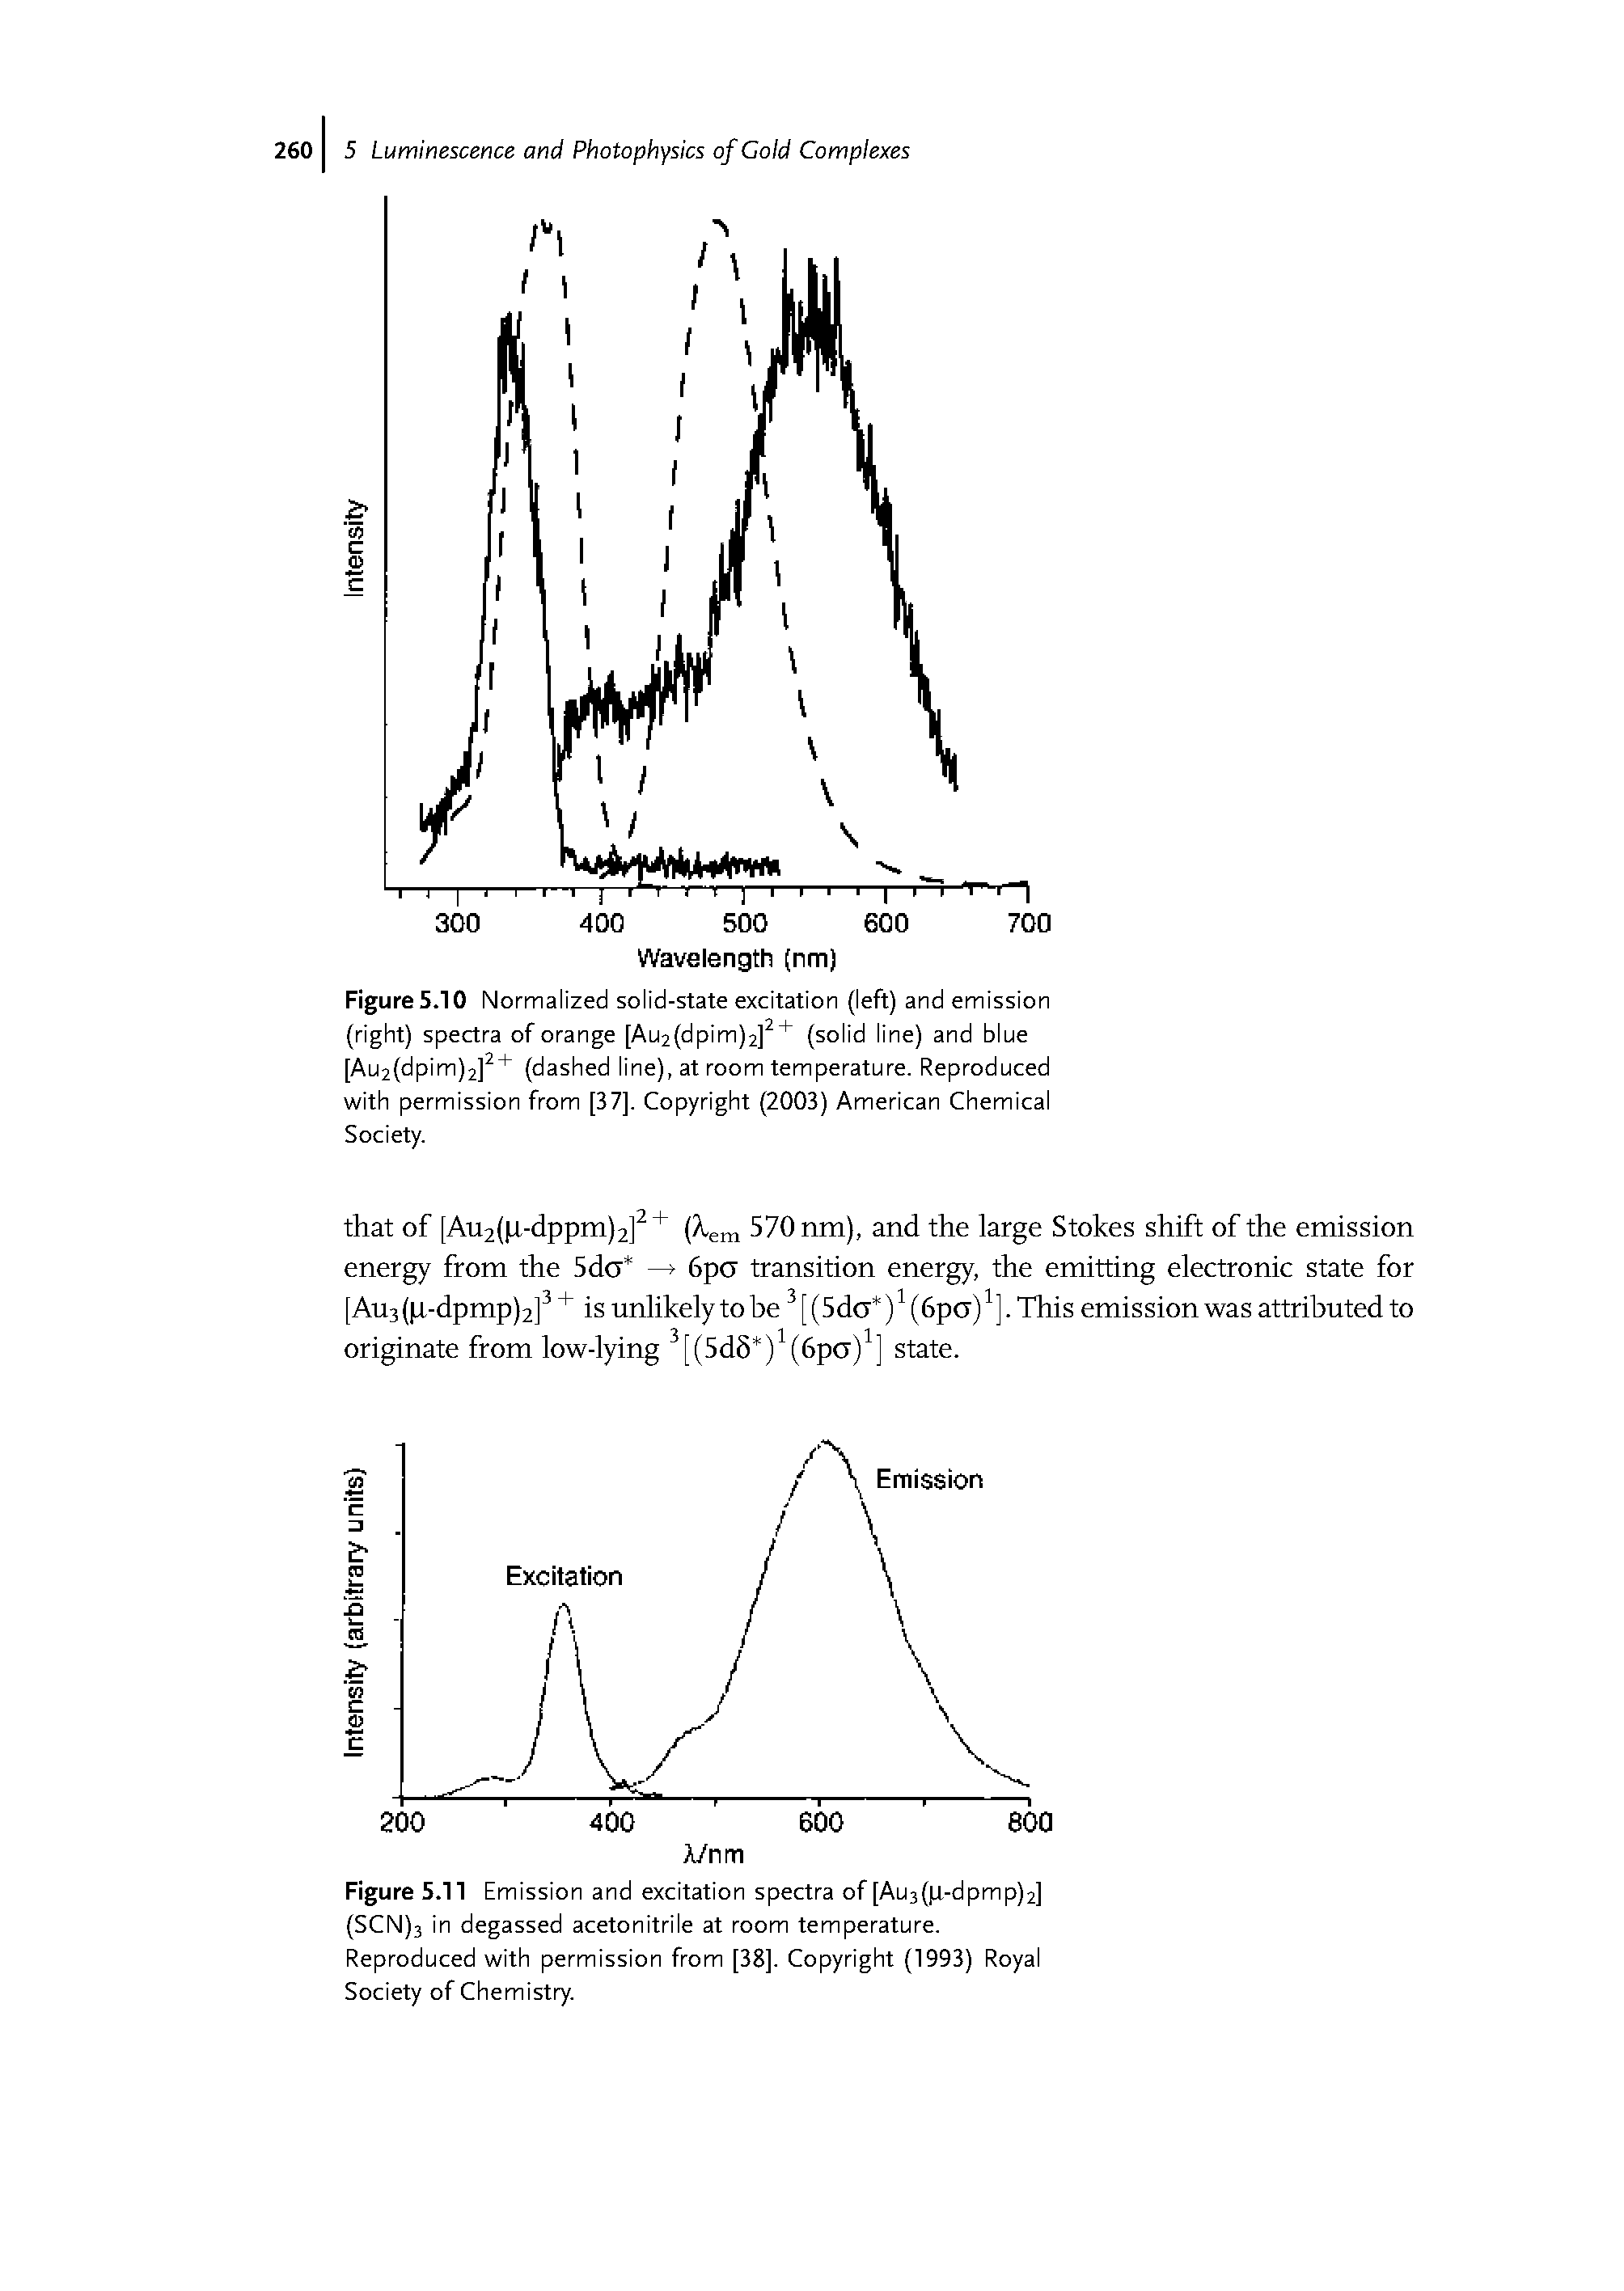 Figure 5.11 Emission and excitation spectra of [Au3(p-dpmp)2] (SCN)3 in degassed acetonitrile at room temperature. Reproduced with permission from [38]. Copyright (1993) Royal Society of Chemistry.